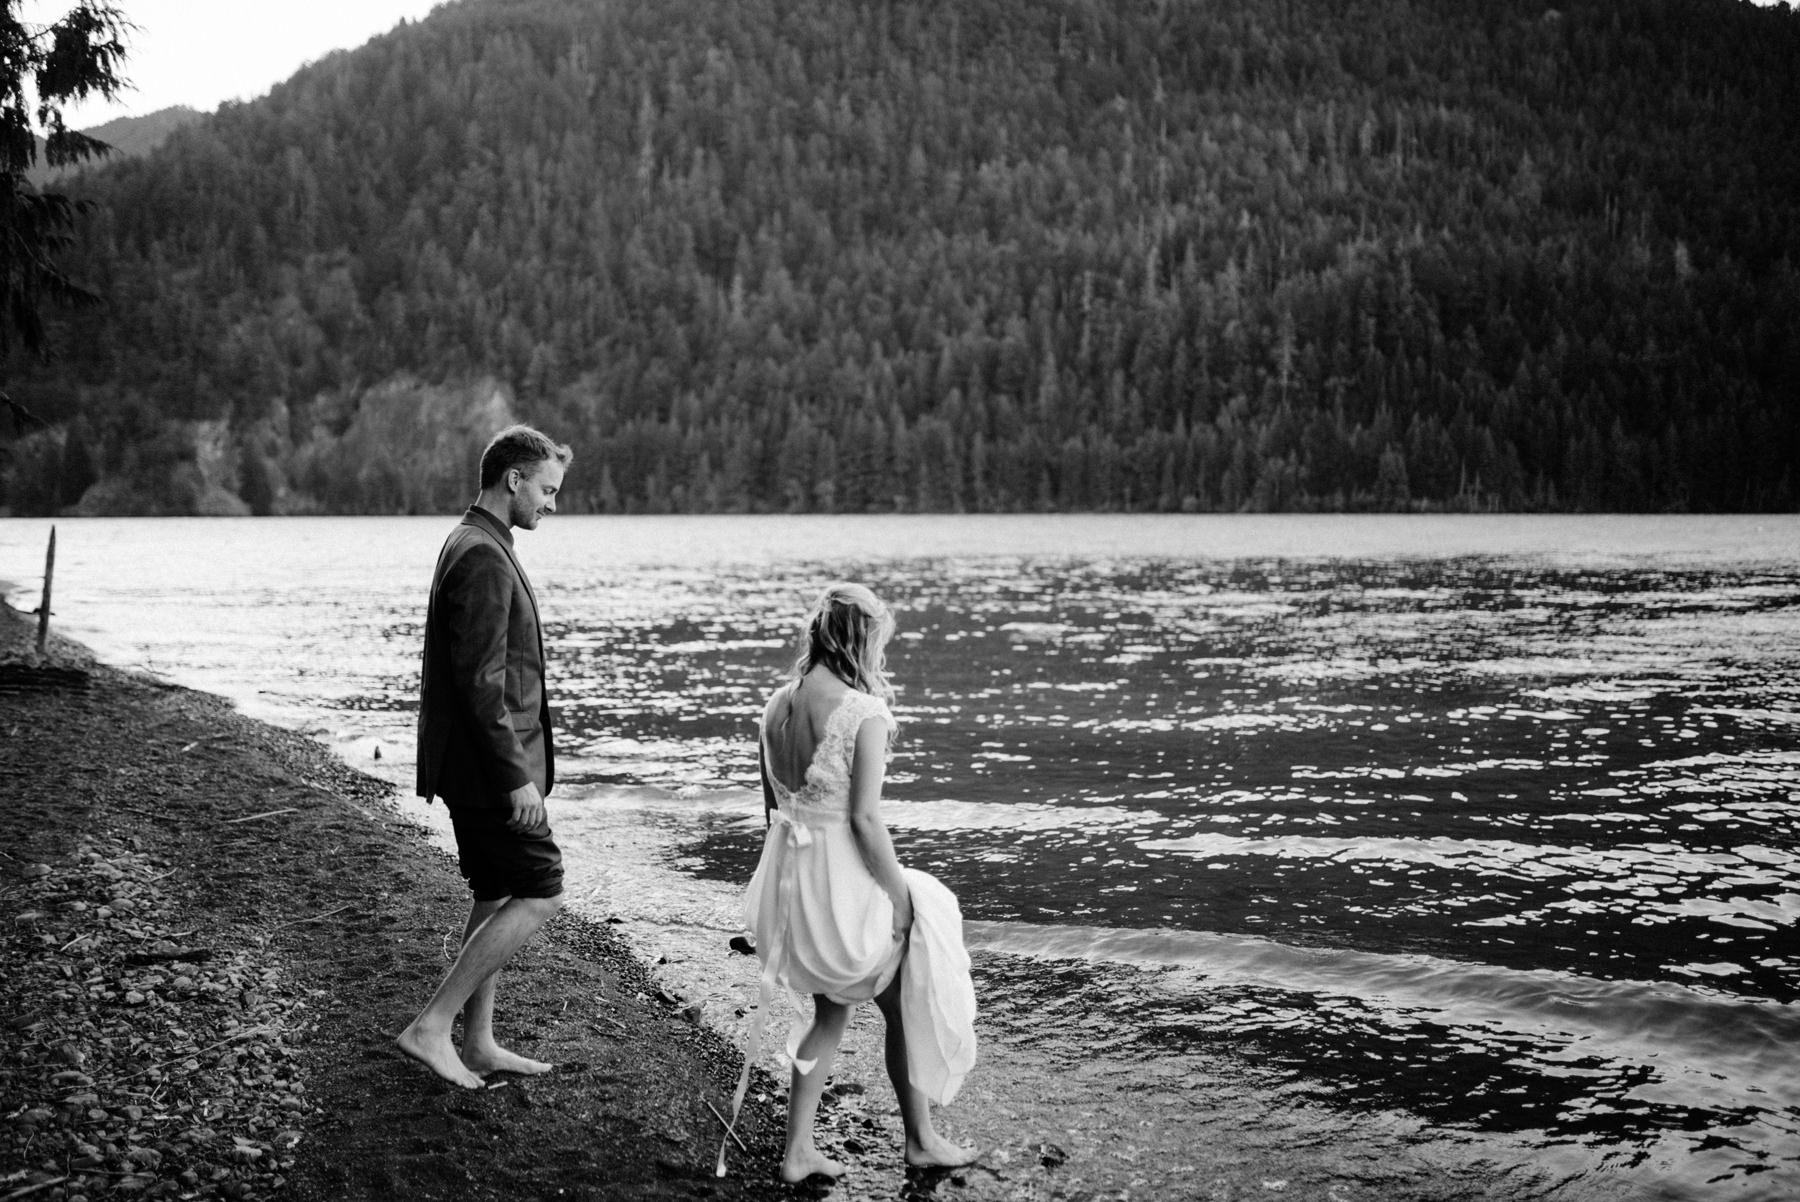 182-bride-and-groom-in-a-canoe-across-lake-crescent-by-nature-bridge.jpg